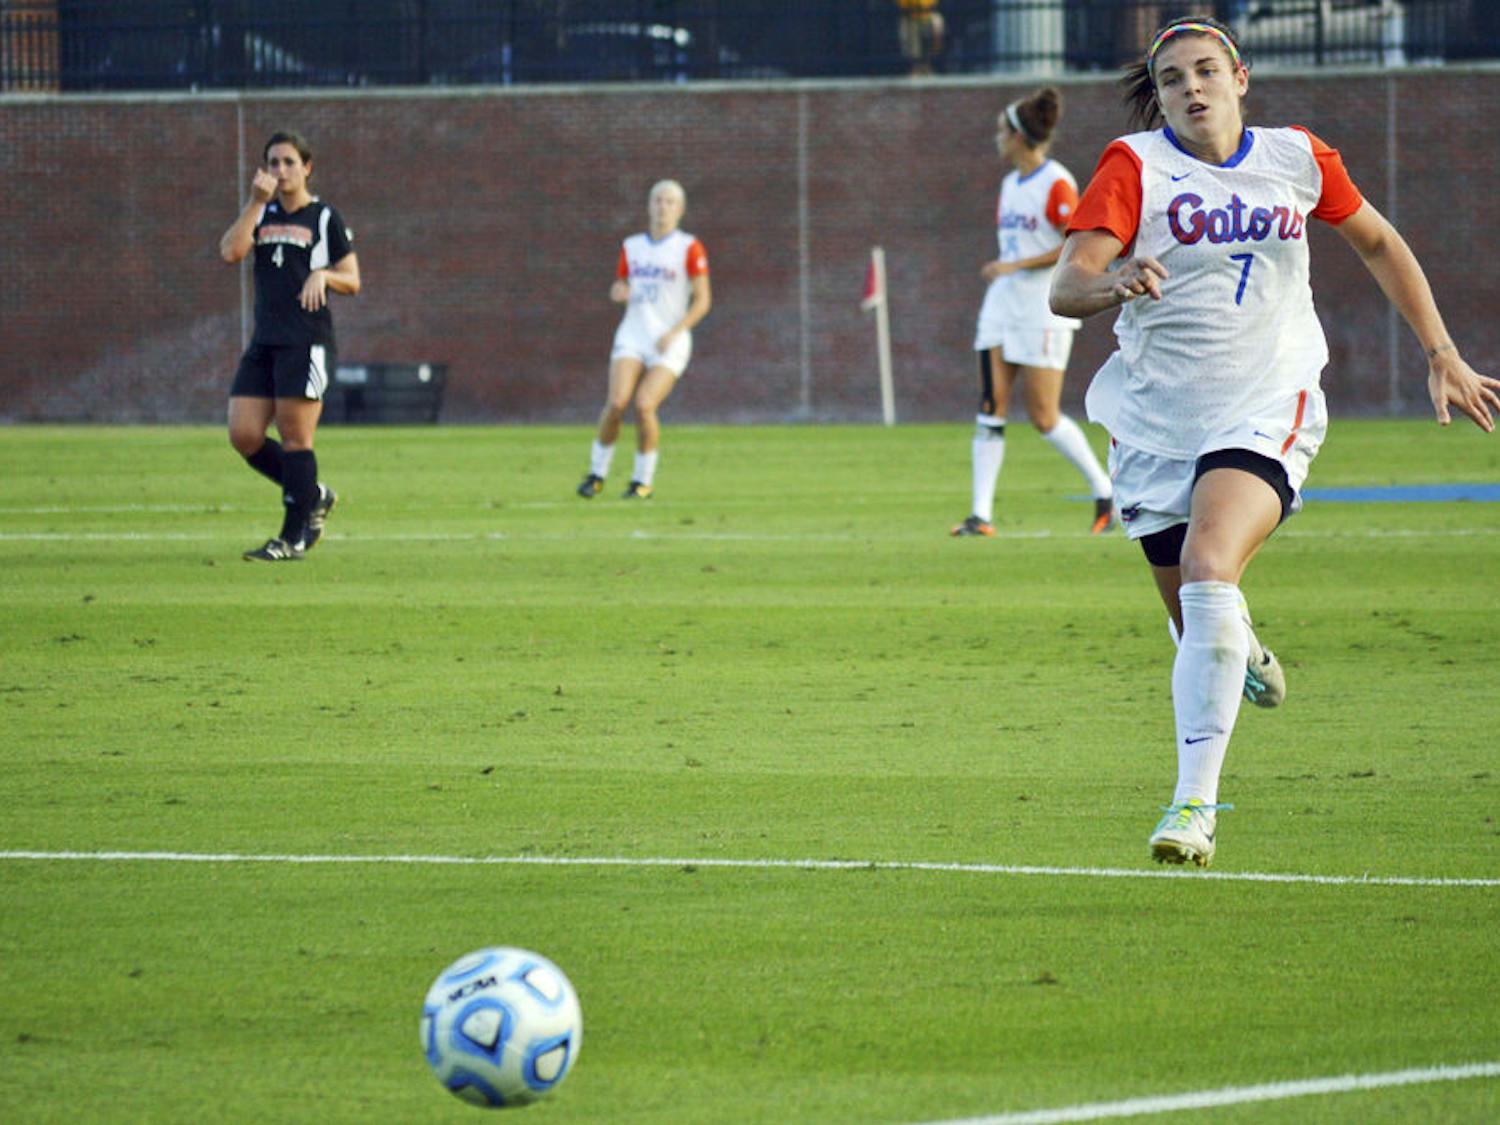 Savannah Jordan chases after the ball during Florida's 3-0 win against Mercer on Sunday at Donald R. Dizney Stadium.